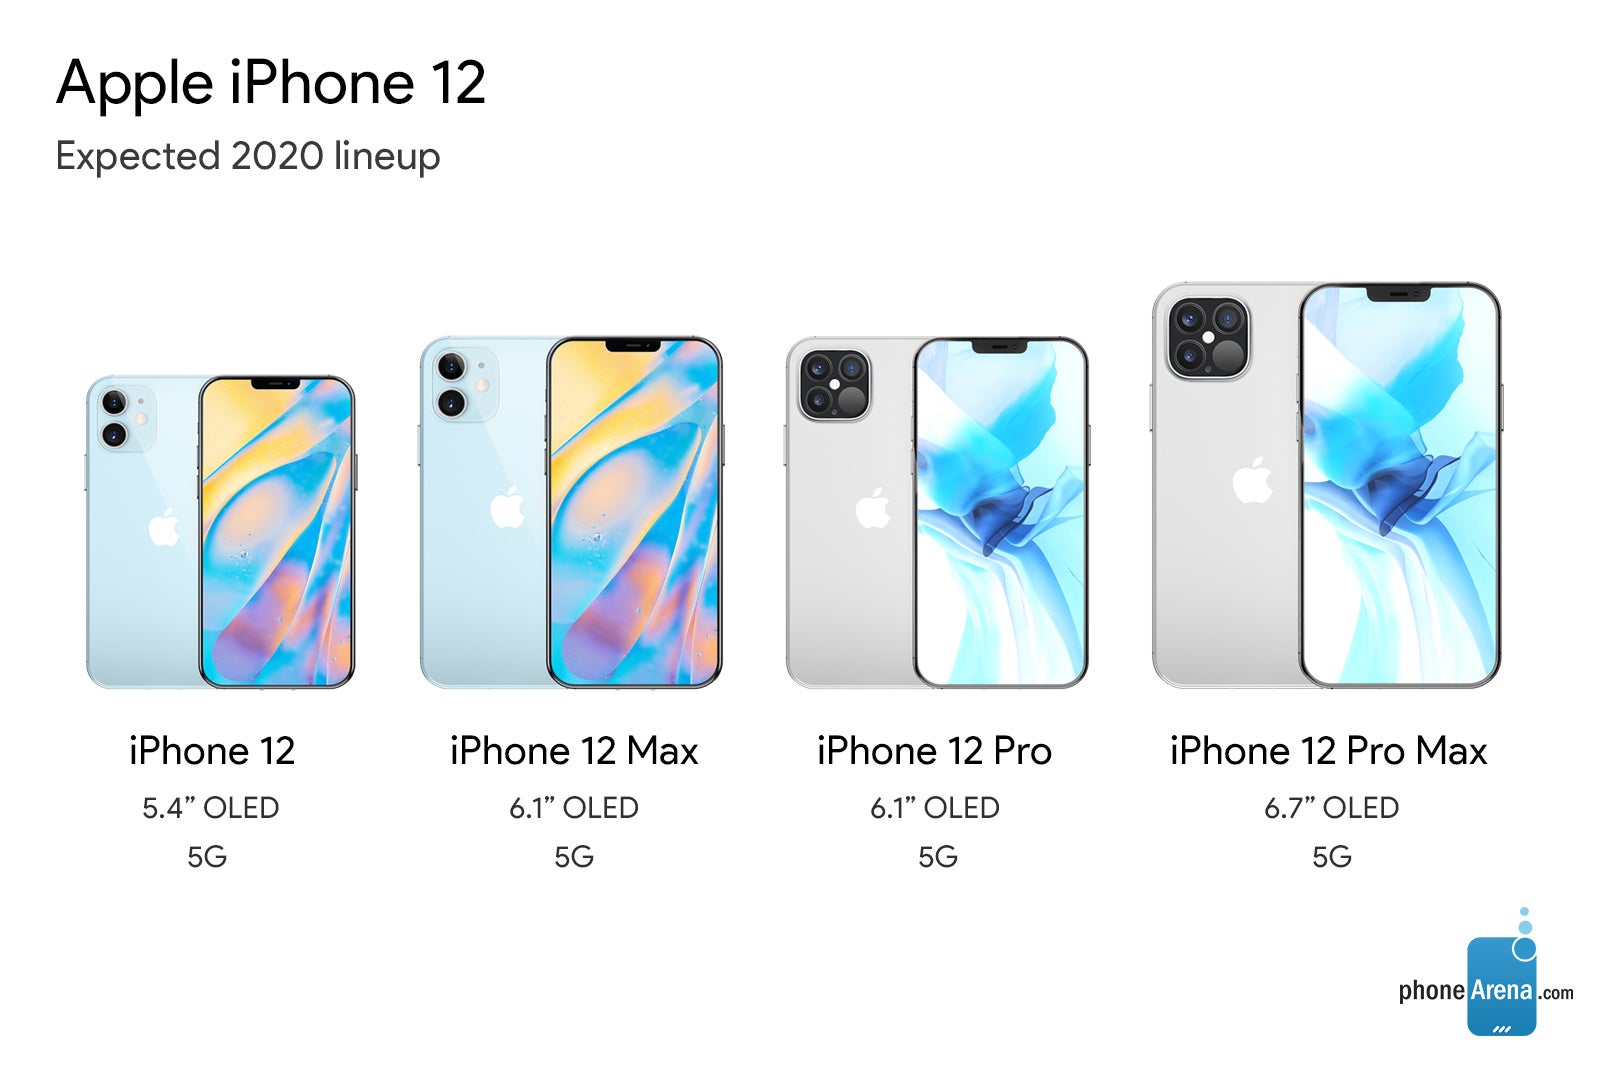 iPhone 12 5G lineup - The small 5.4-inch iPhone 12 5G could arrive even later than expected